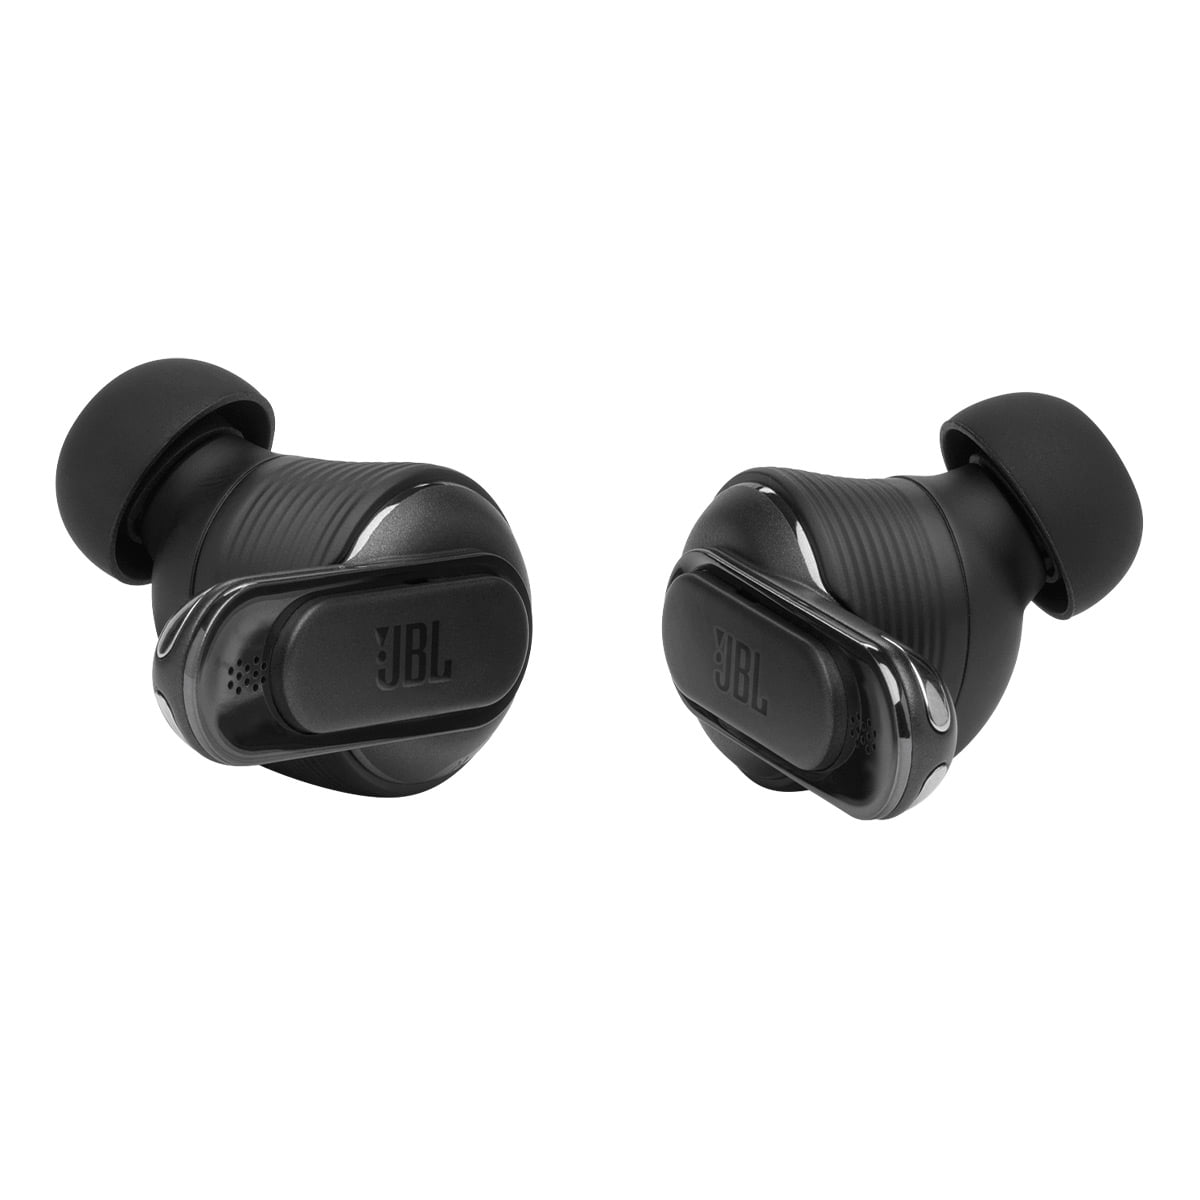 Noise 2 JBL Pro Tour with True Smart (Black) Cancelling Wireless Case Earbuds